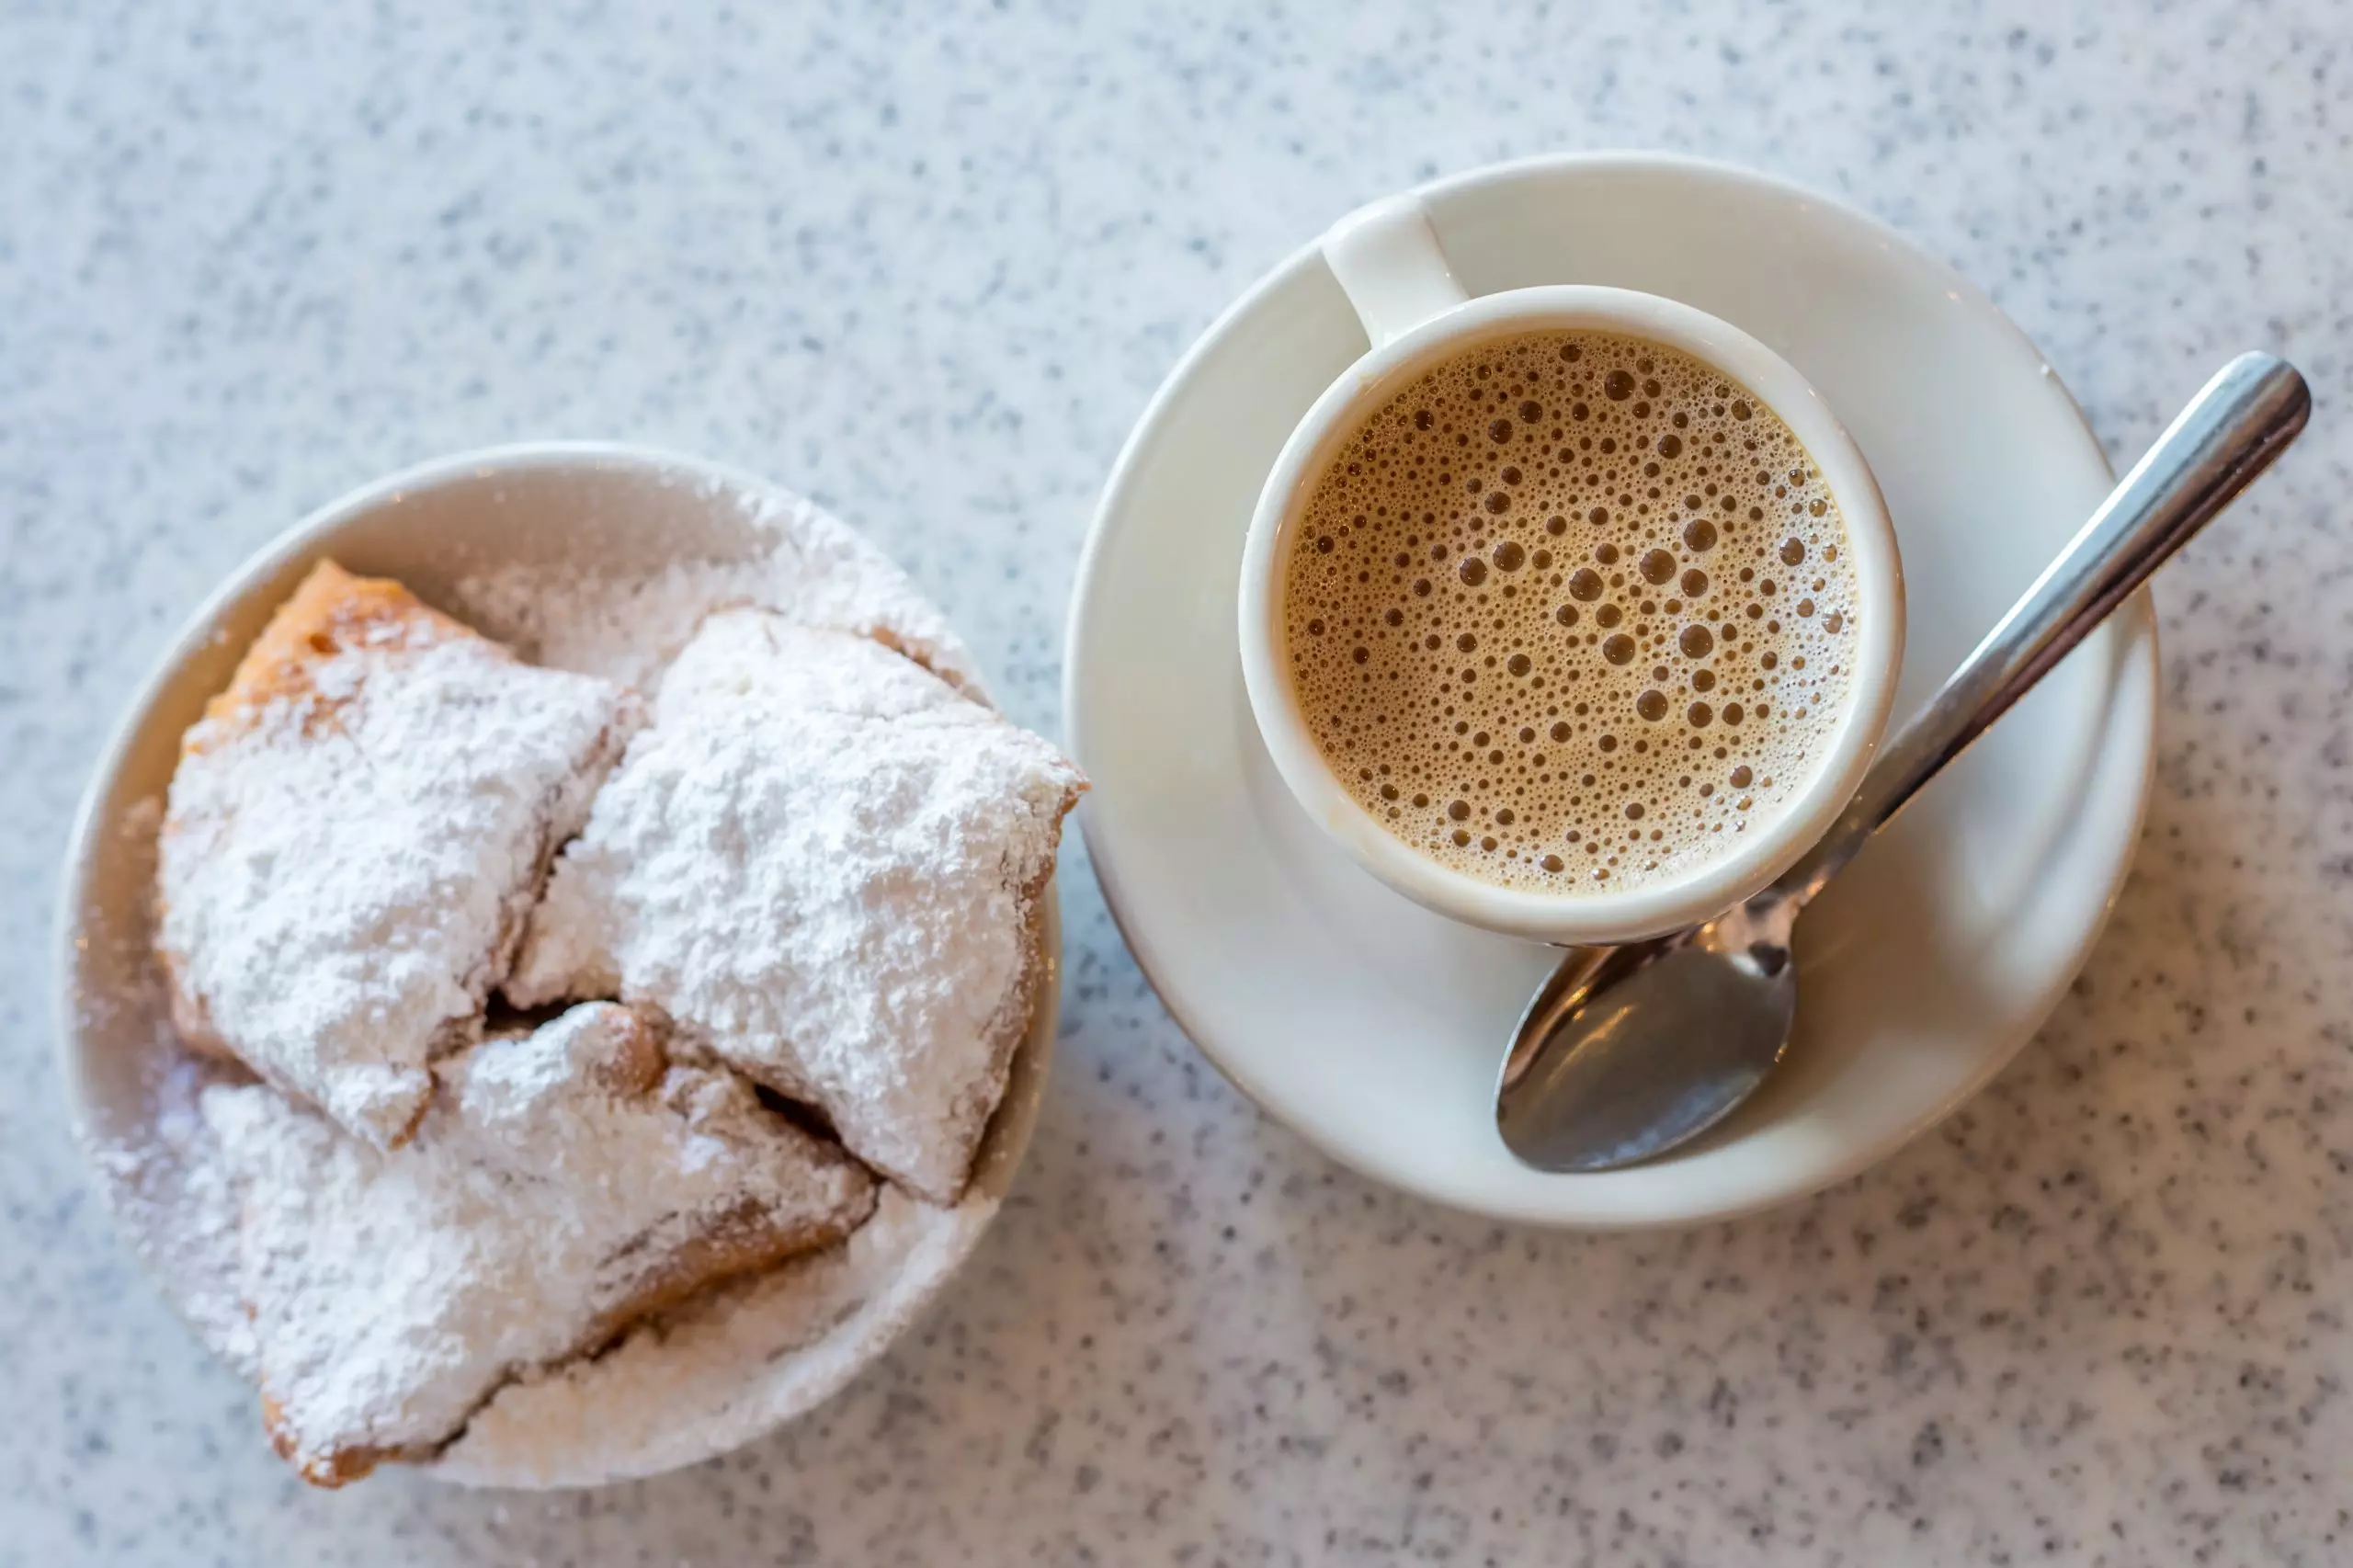 Beignets and coffee